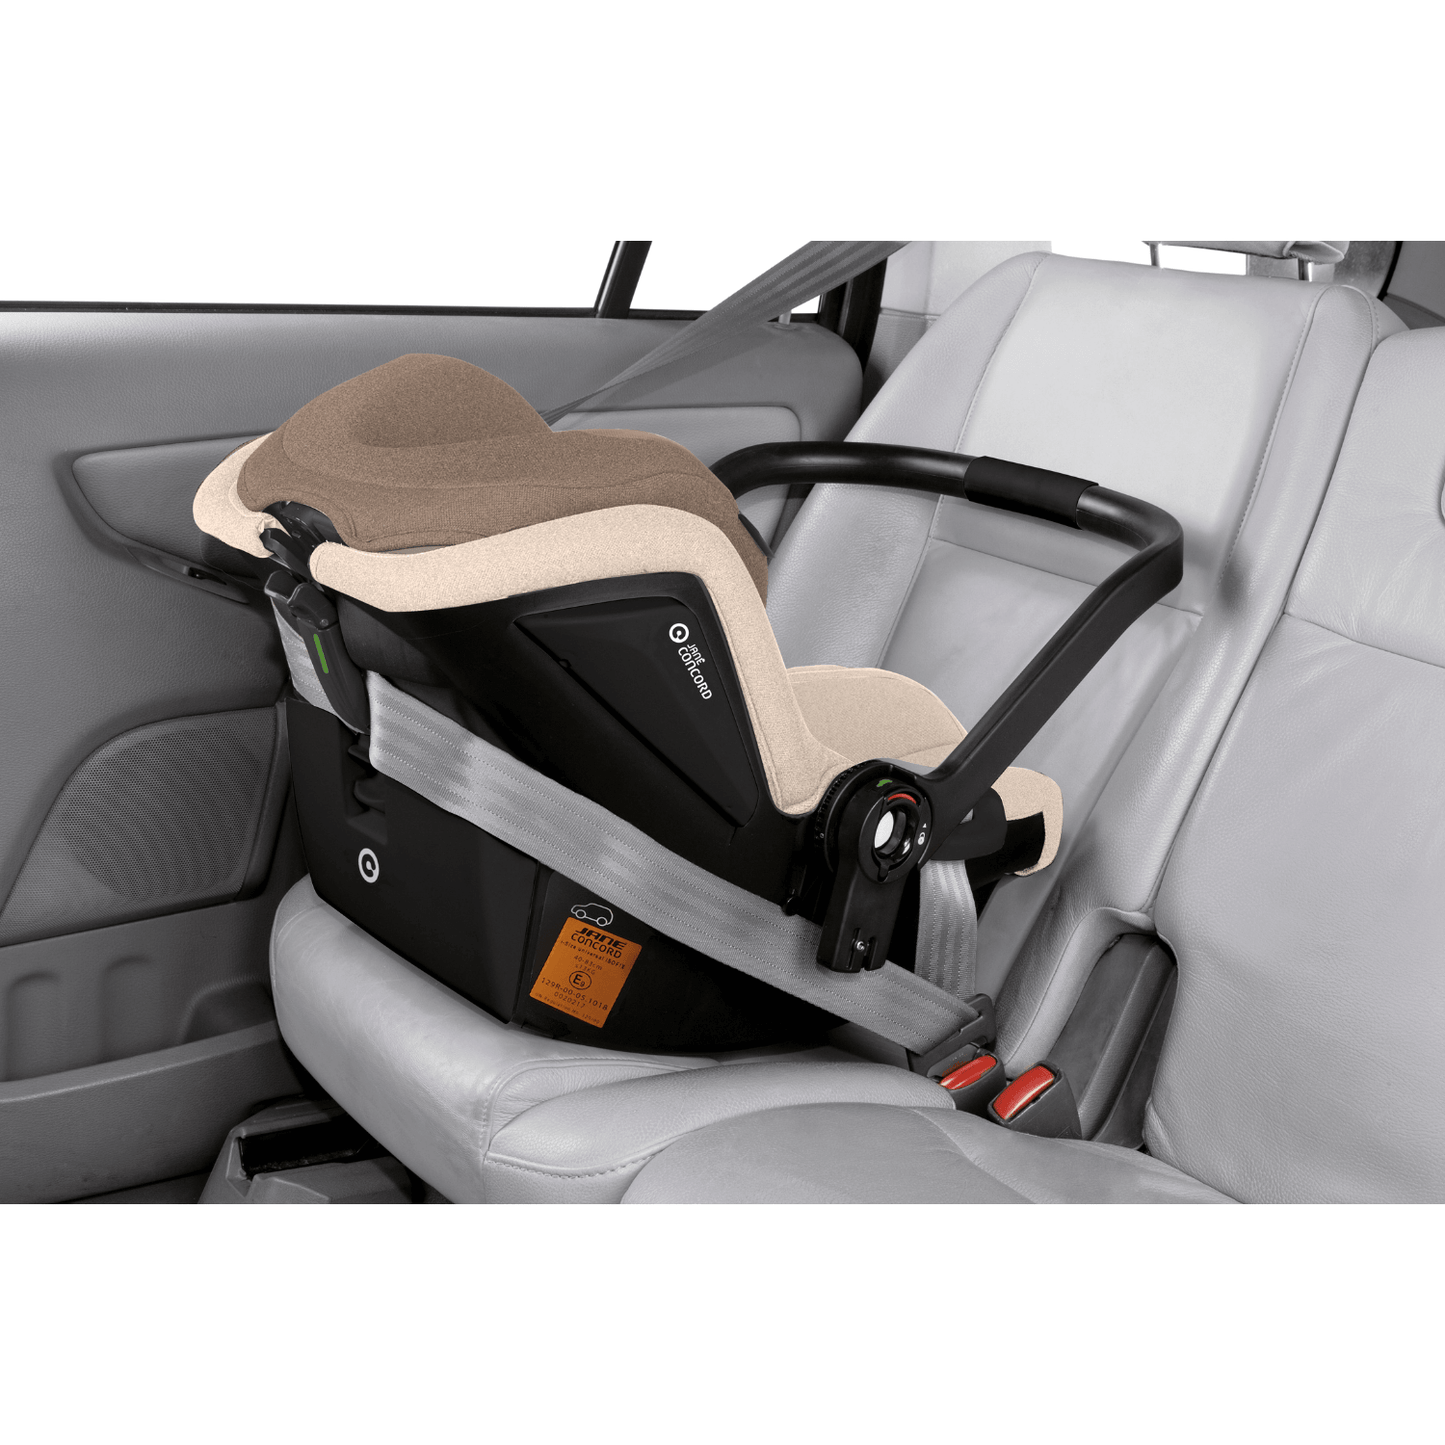 Jané Koos iSize R1 ISOFIX & Belt-fitted Car Seat